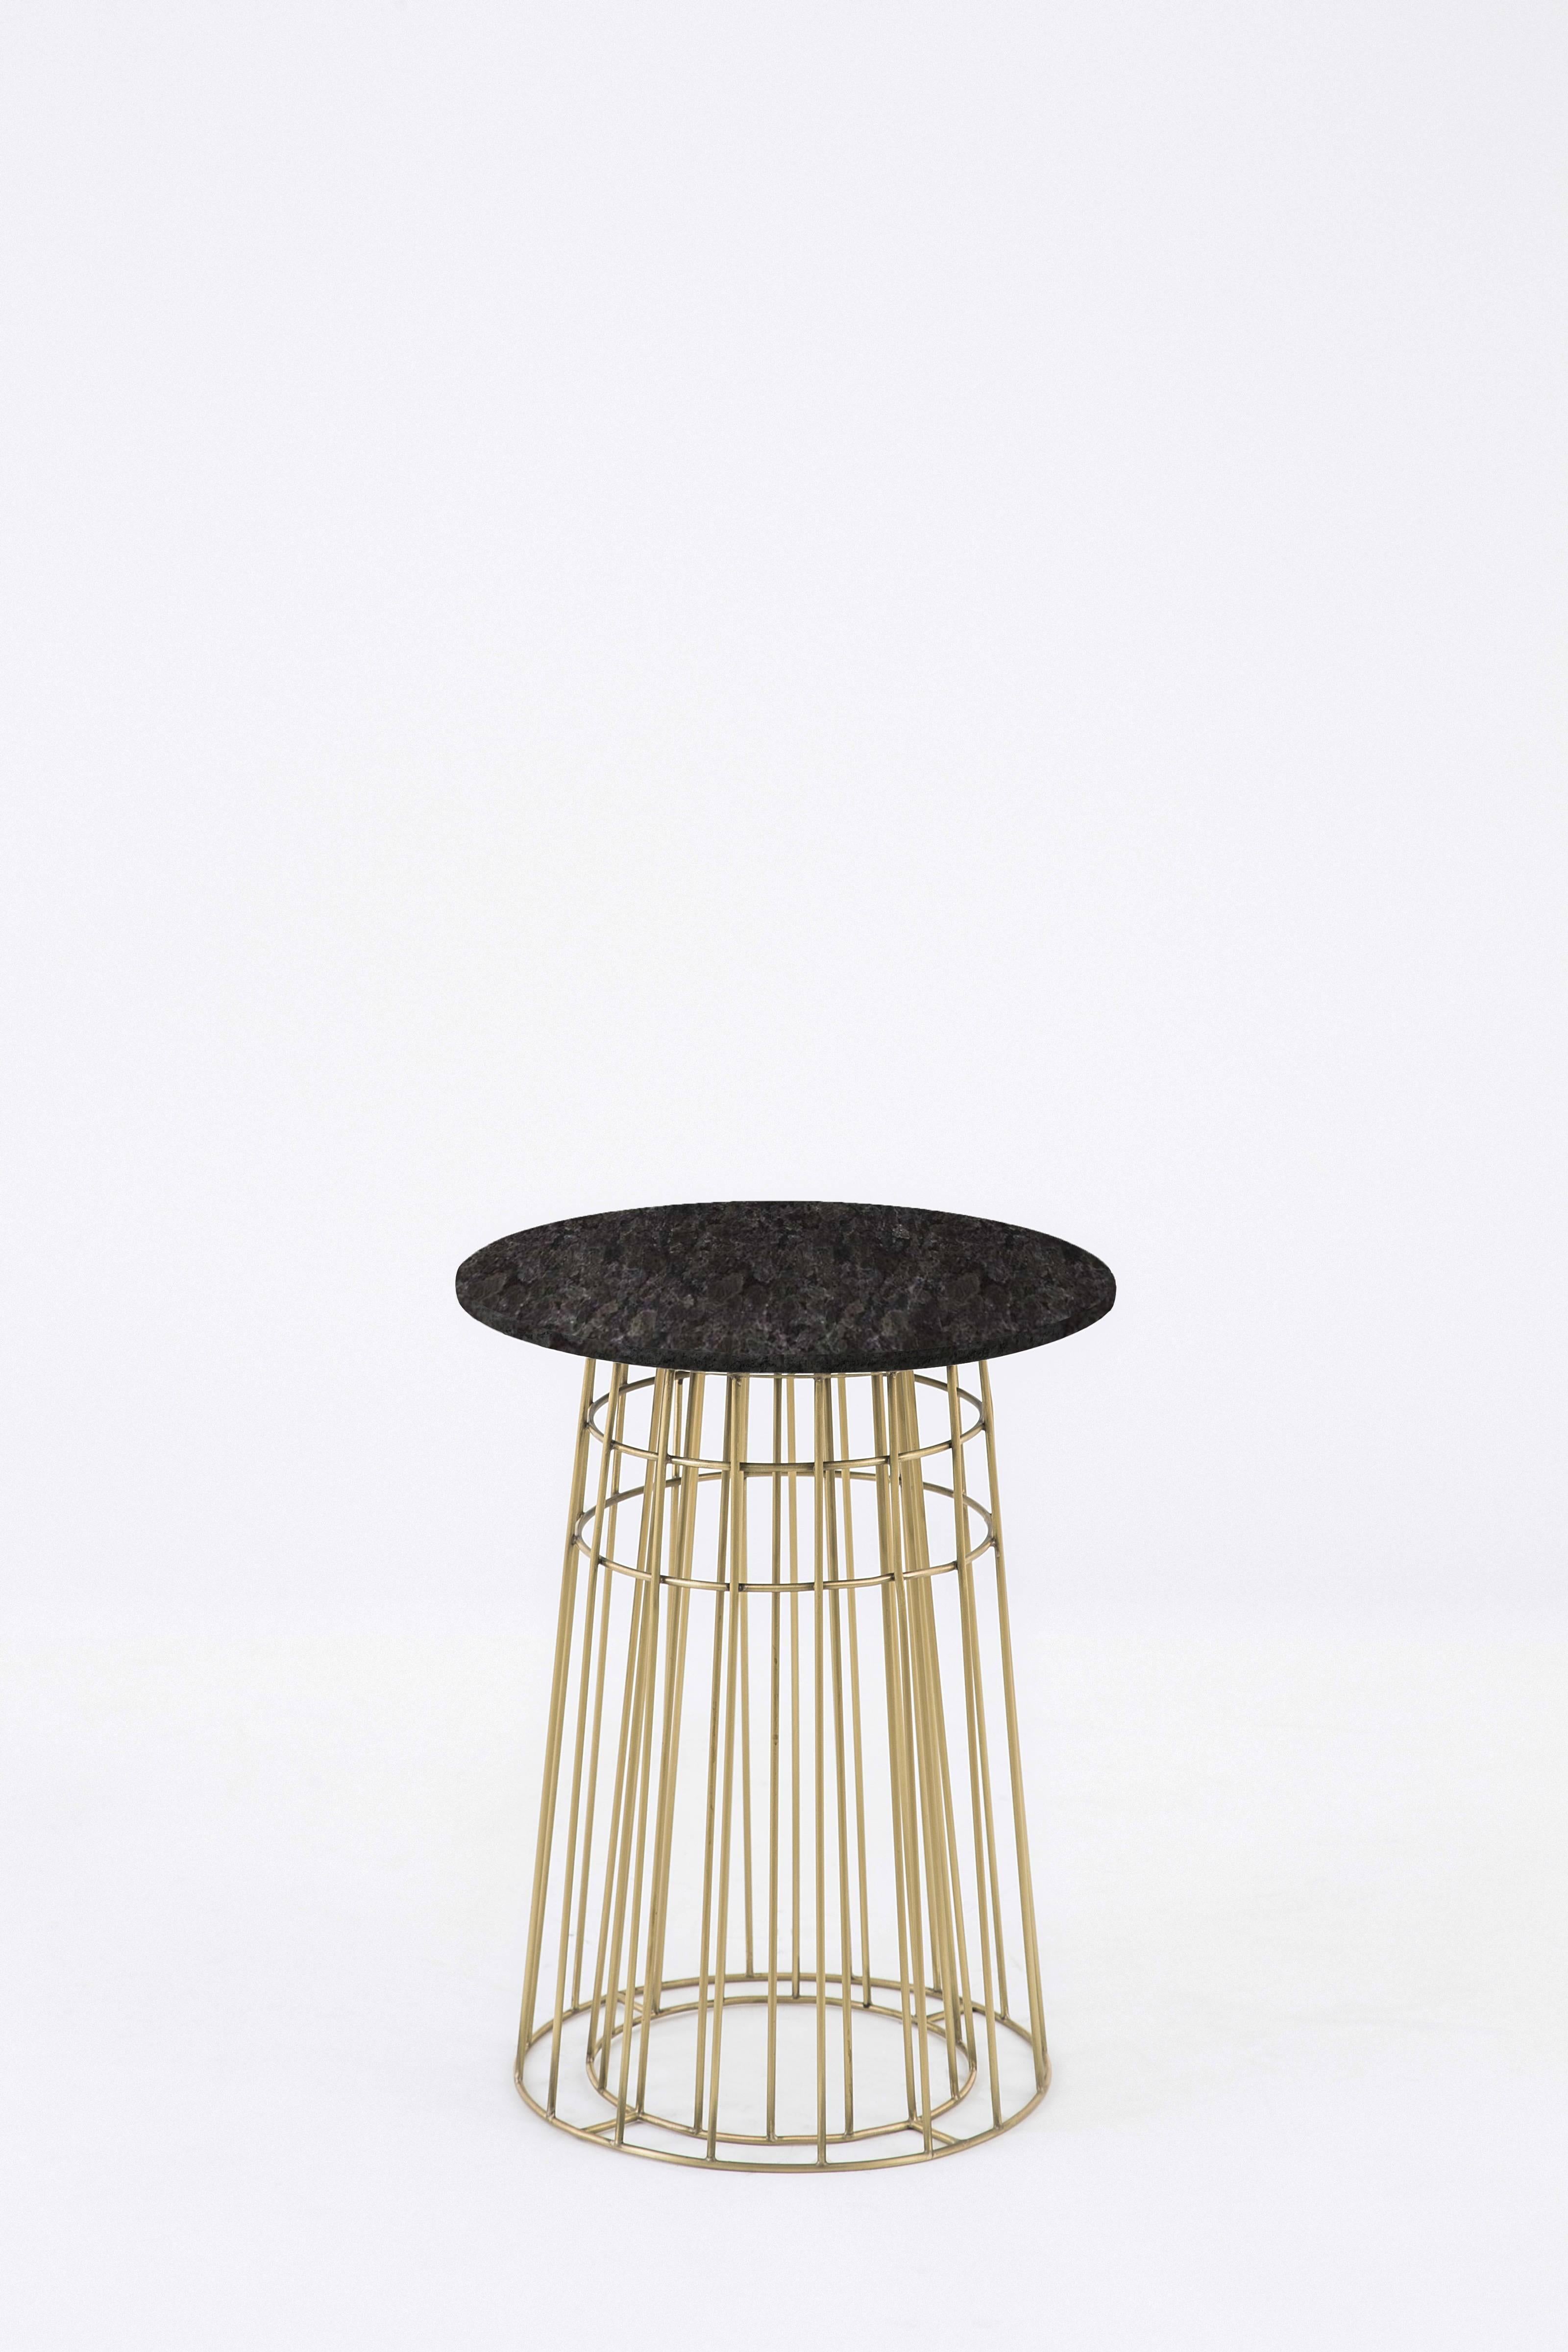 Contemporary Side Table or Tray Table in Granite and Brass In New Condition For Sale In Sao Paulo, SP